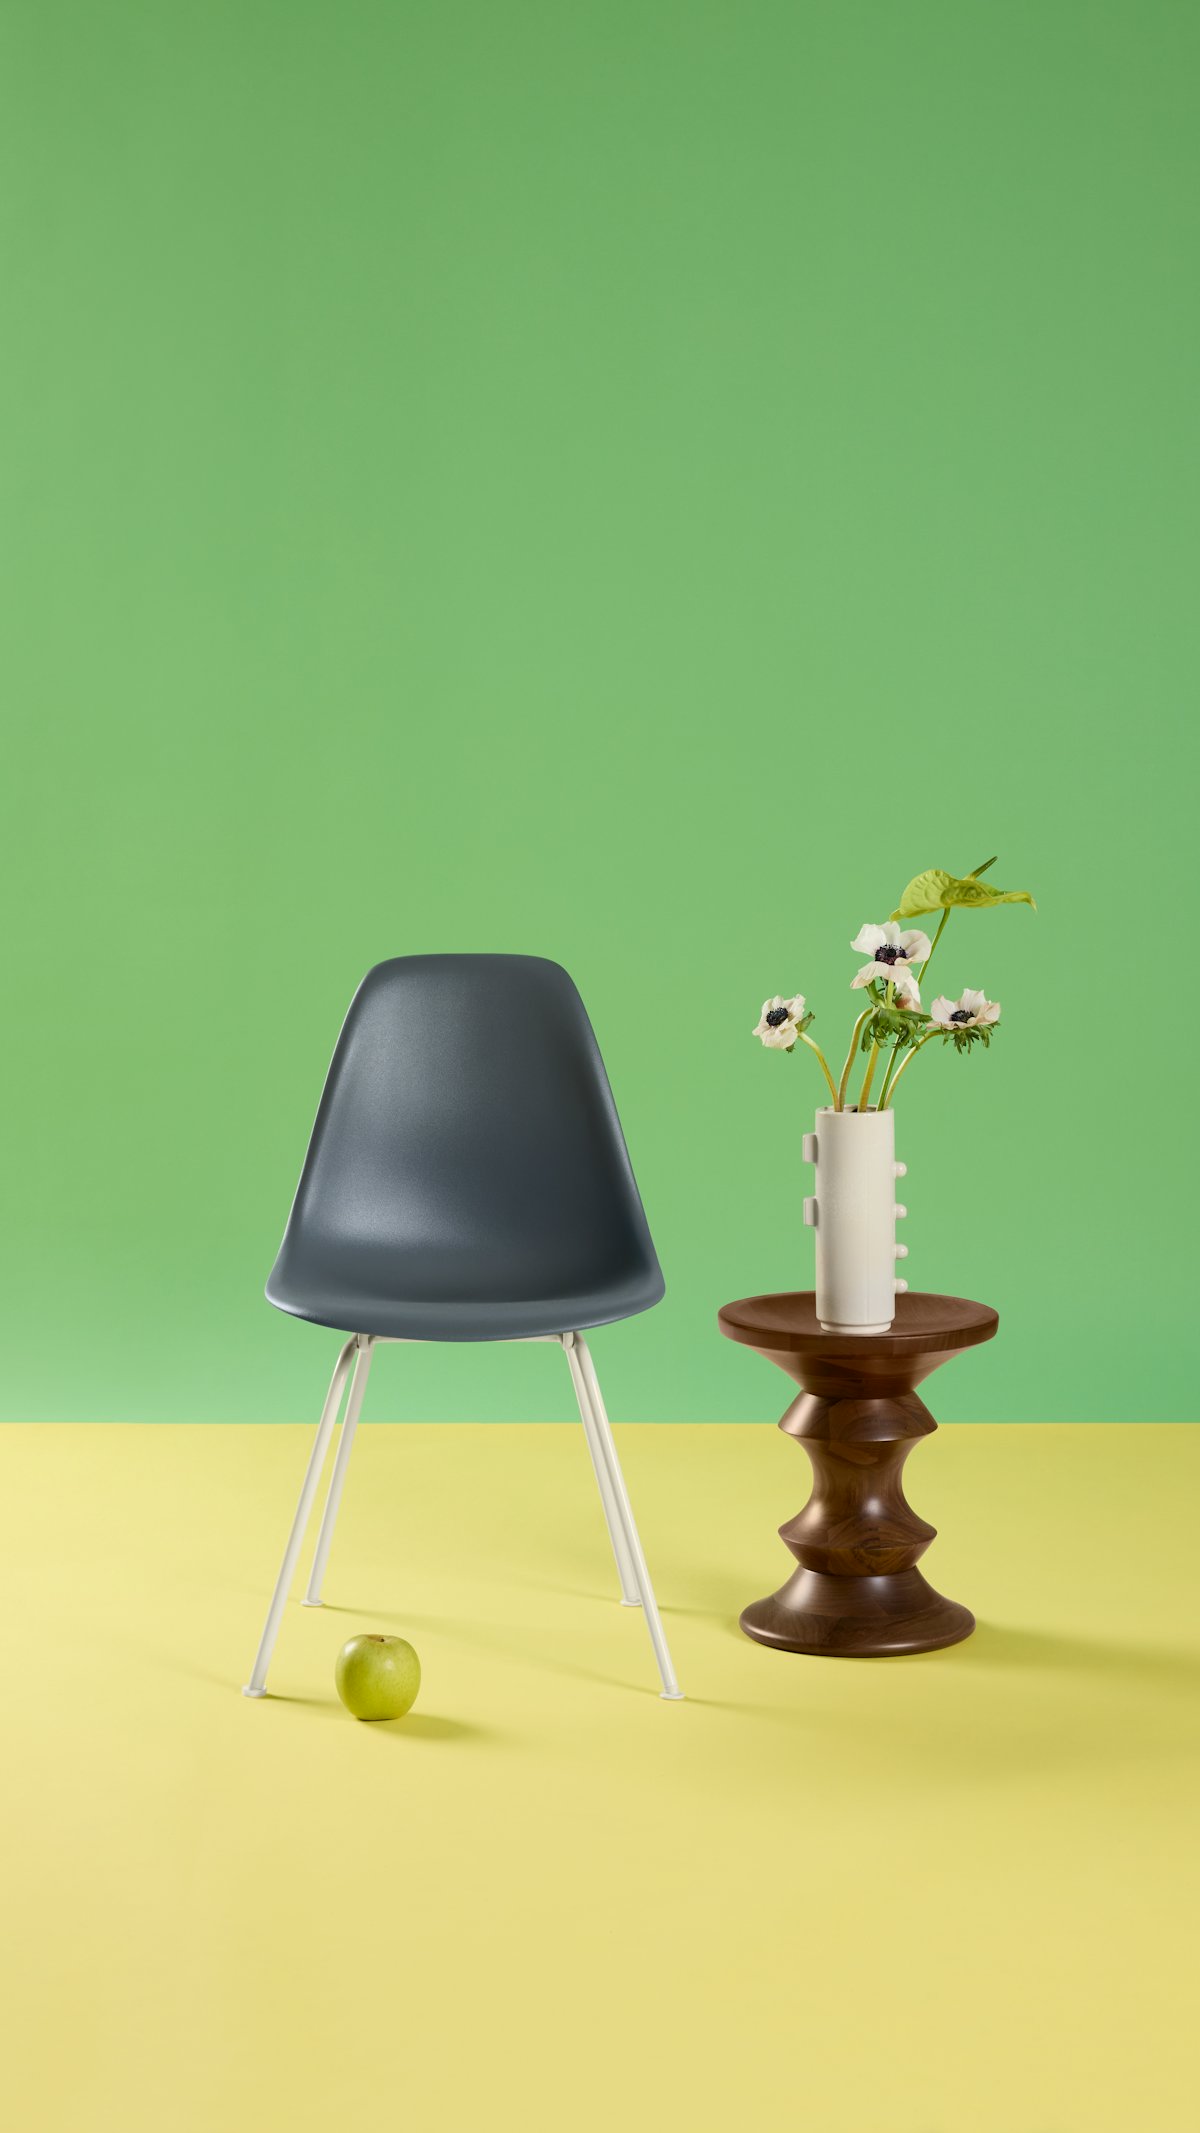 Single blue Eames Molded Plastic Side Chair with green background styled with Eames Walnut Stool